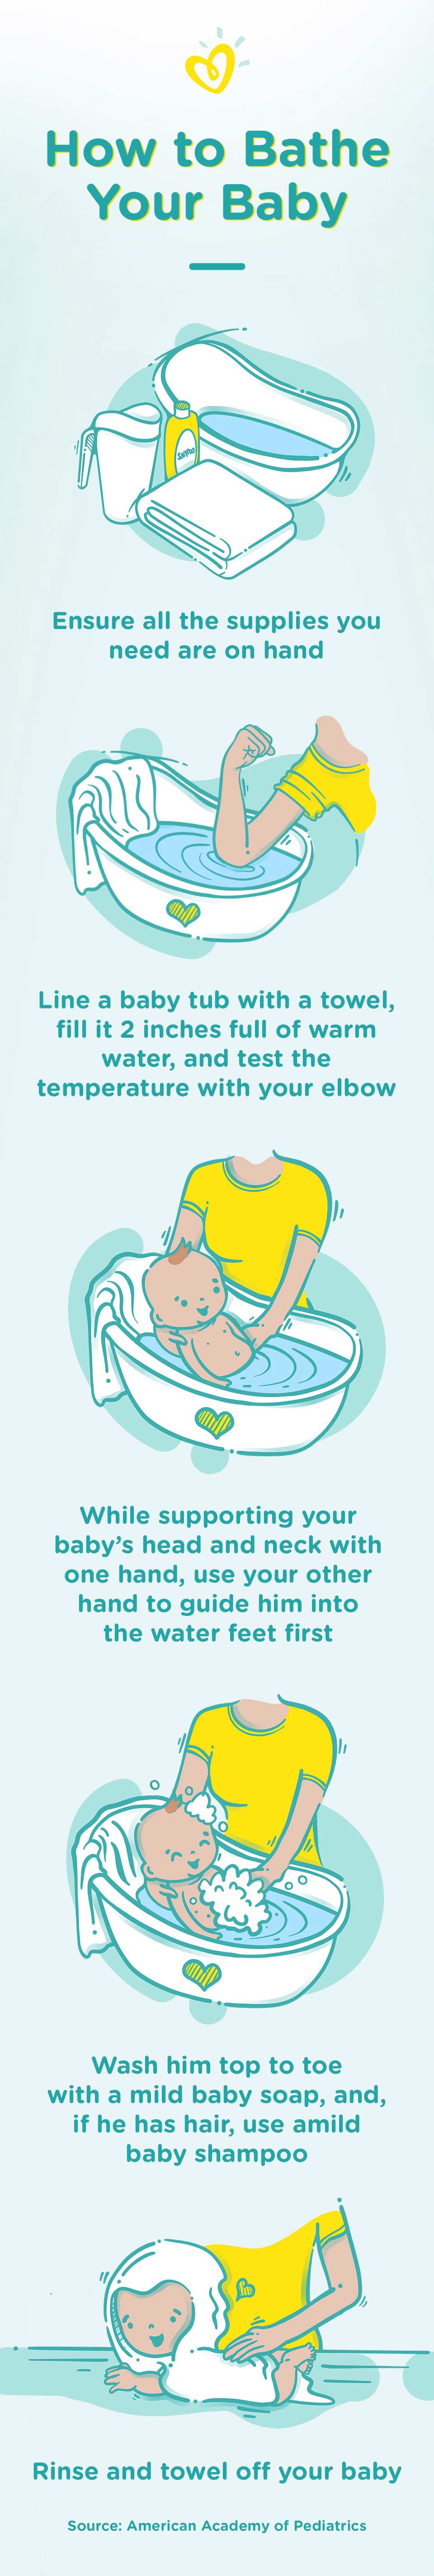 How to Clean your Baby Properly? - BabyInfo